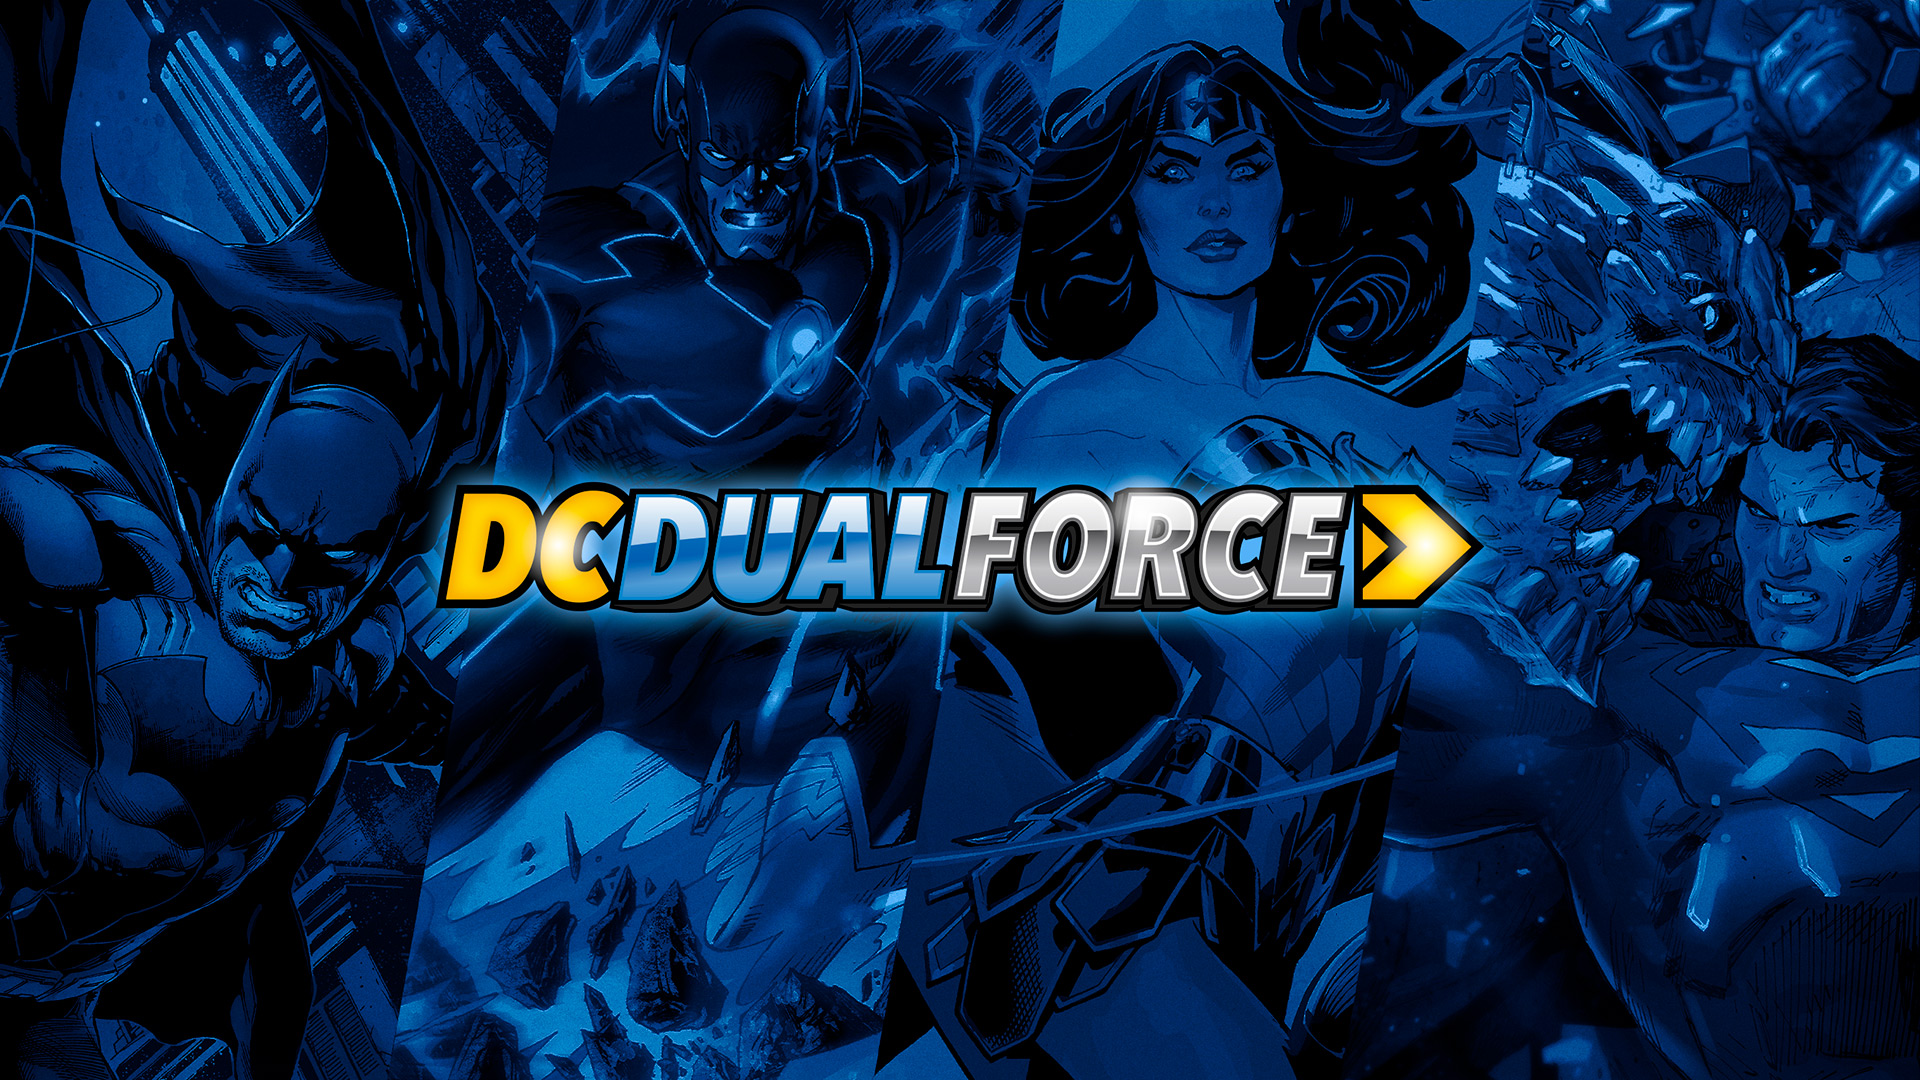 DC Dual Force Resurfaces, Coming Soon to PC